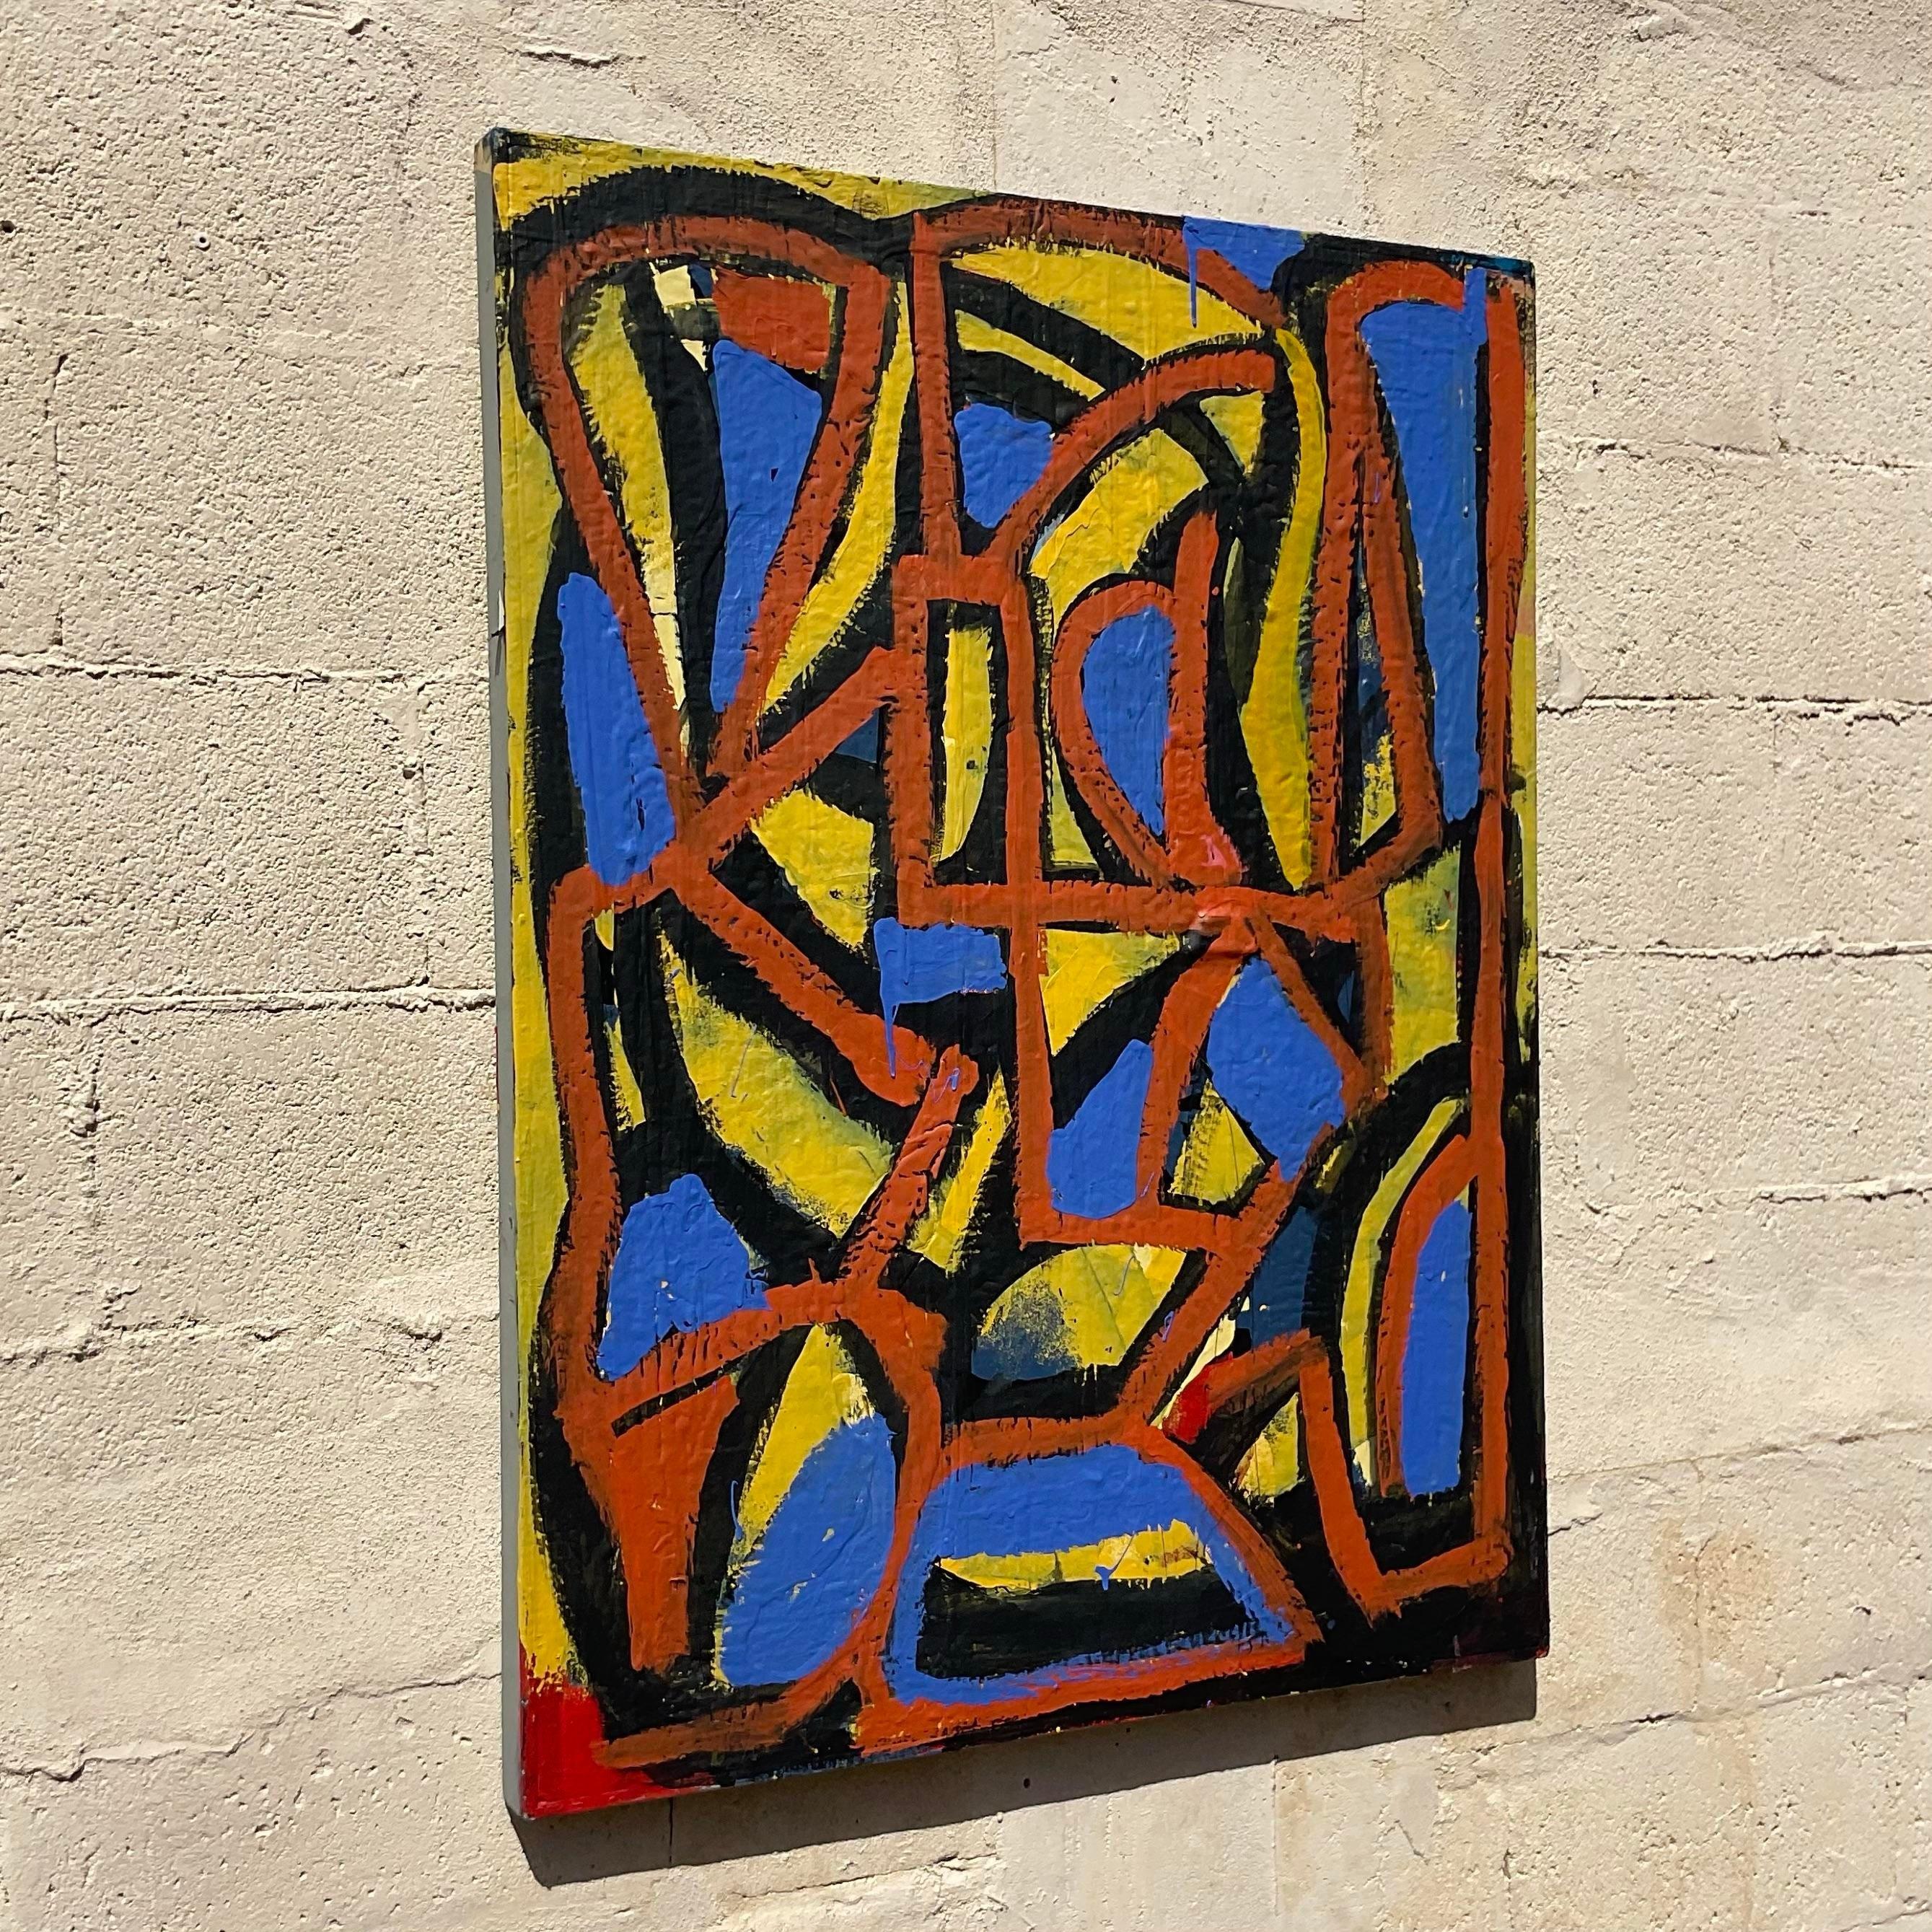 This piece is a gorgeous geometric style painting that utilizes hard angles and linear shapes. The bold primary colors yet minimalistic design make this piece a subtle statement. Acquired from a Palm Beach estate. 